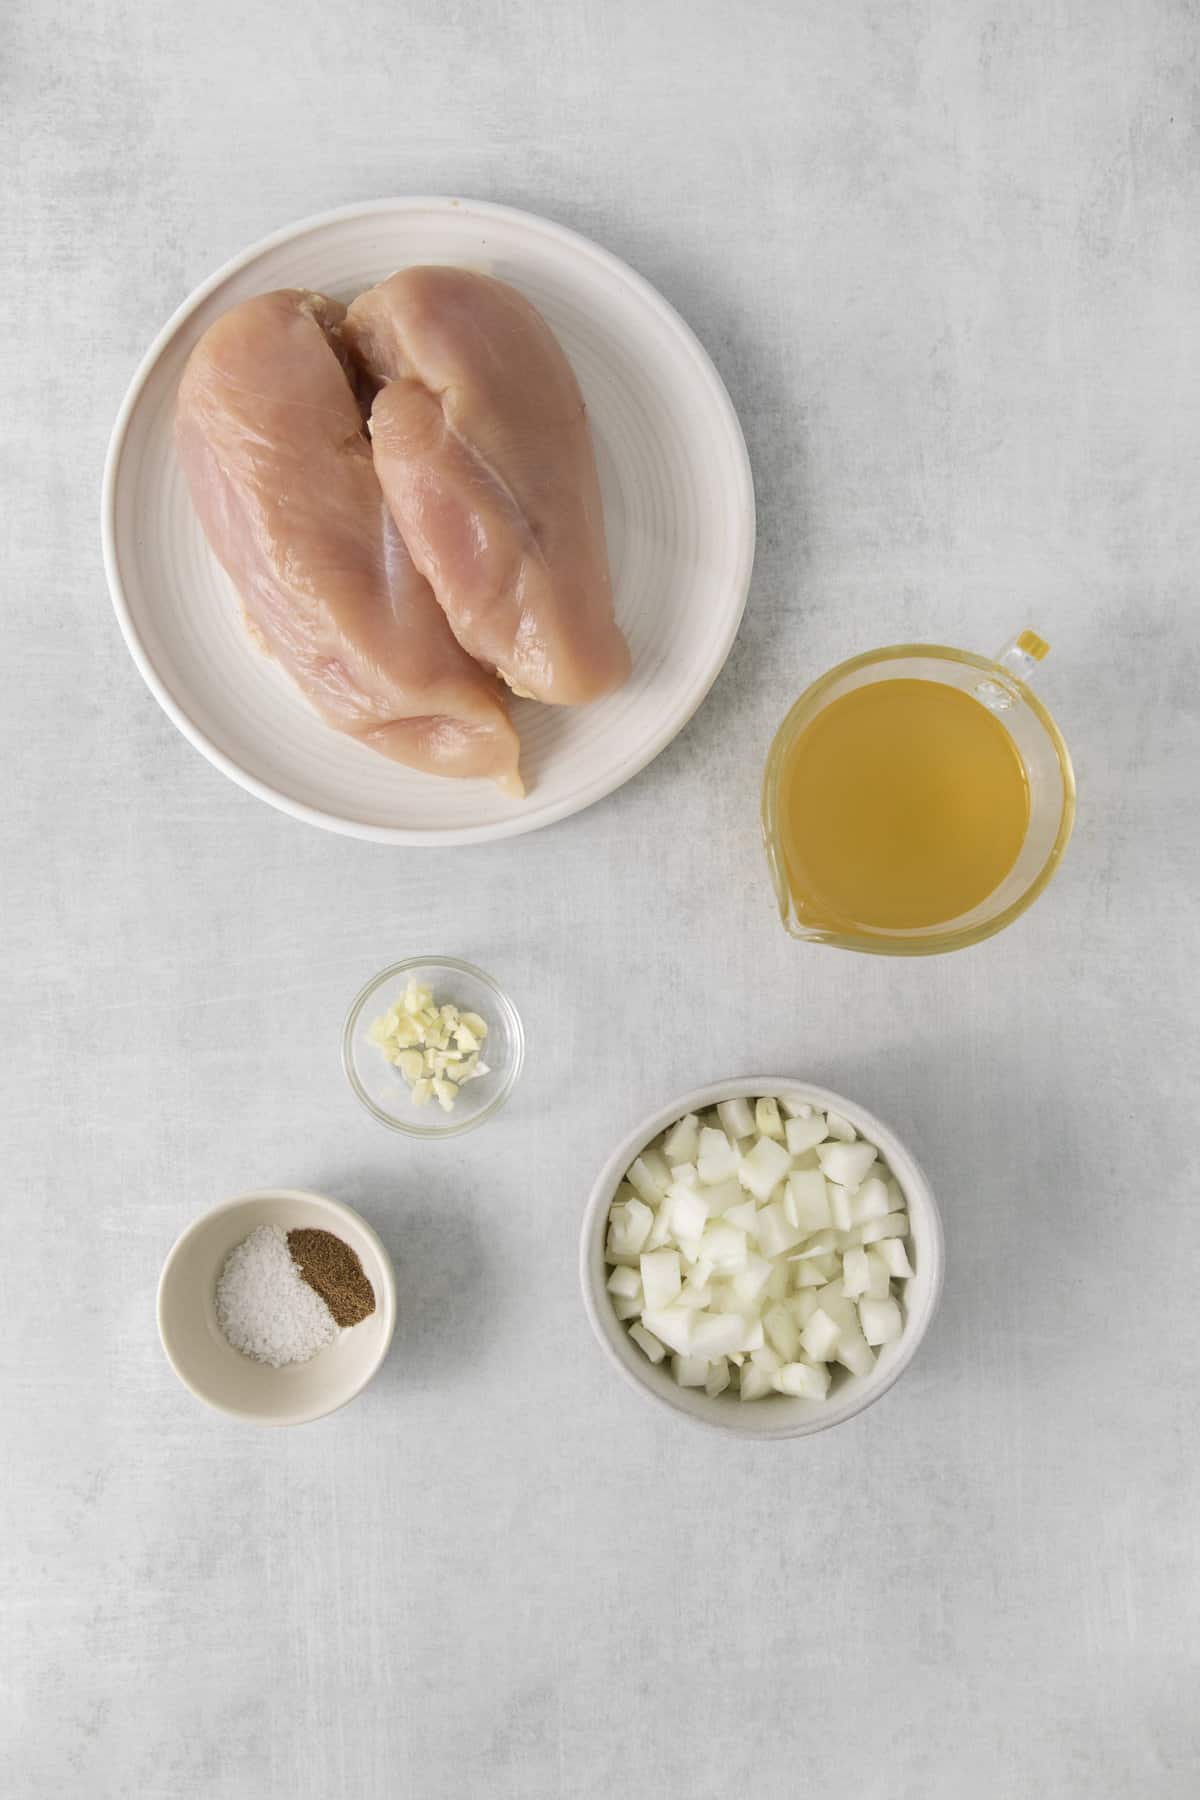 chicken, broth, garlic, onion, and seasonings in separate dishes.